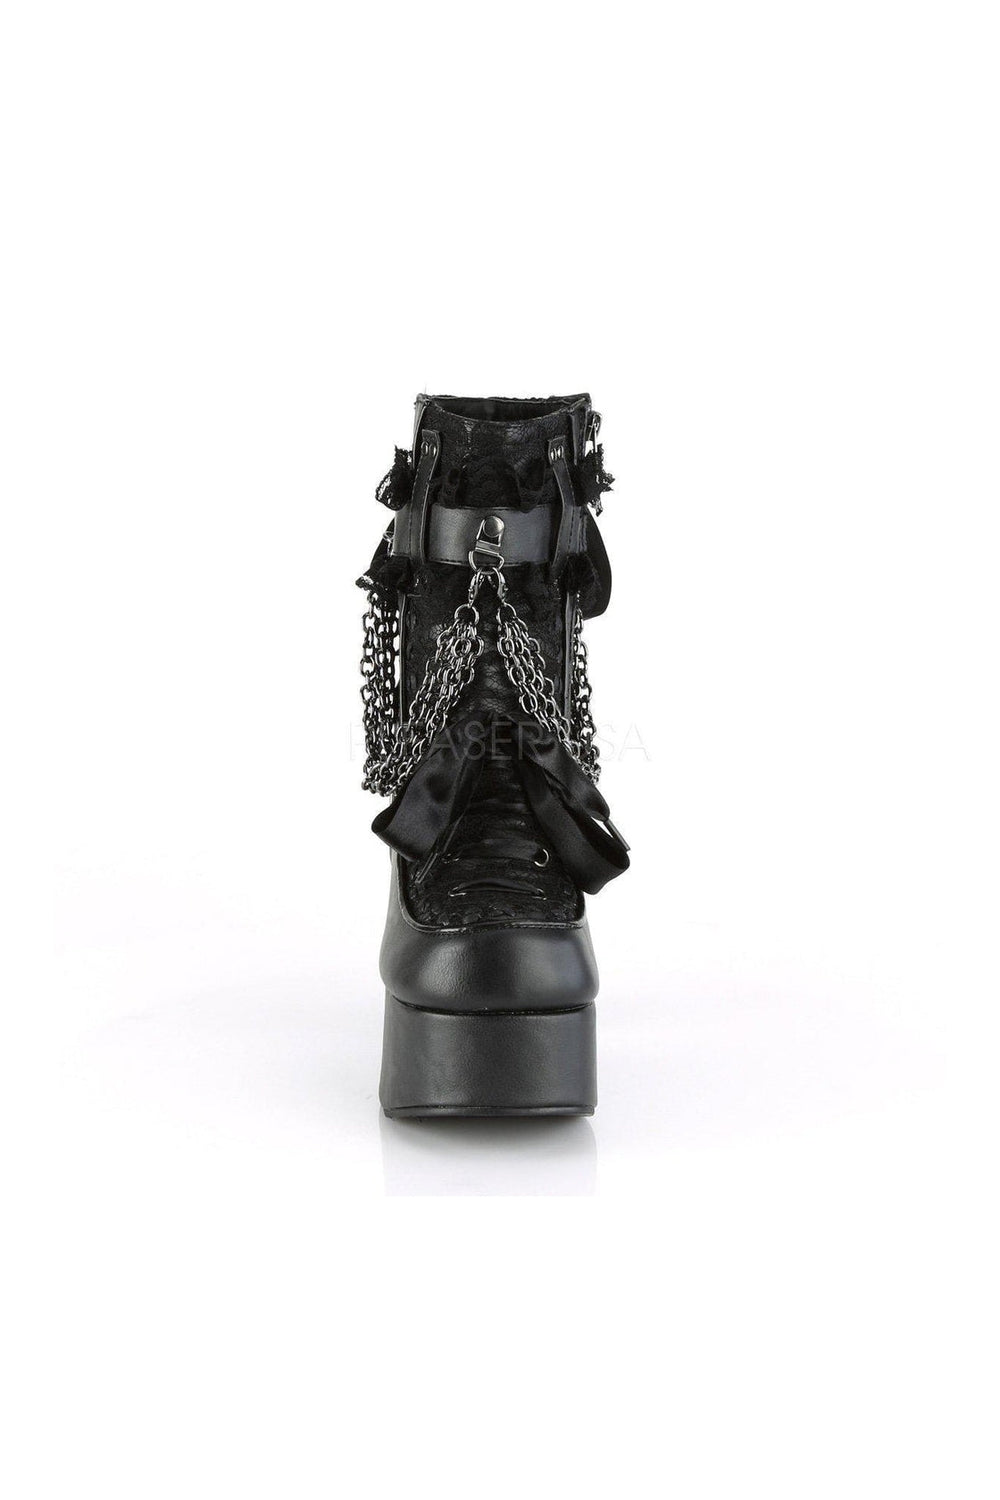 CHARADE-110 Demonia Ankle Boot | Black Faux Leather-Demonia-SEXYSHOES.COM